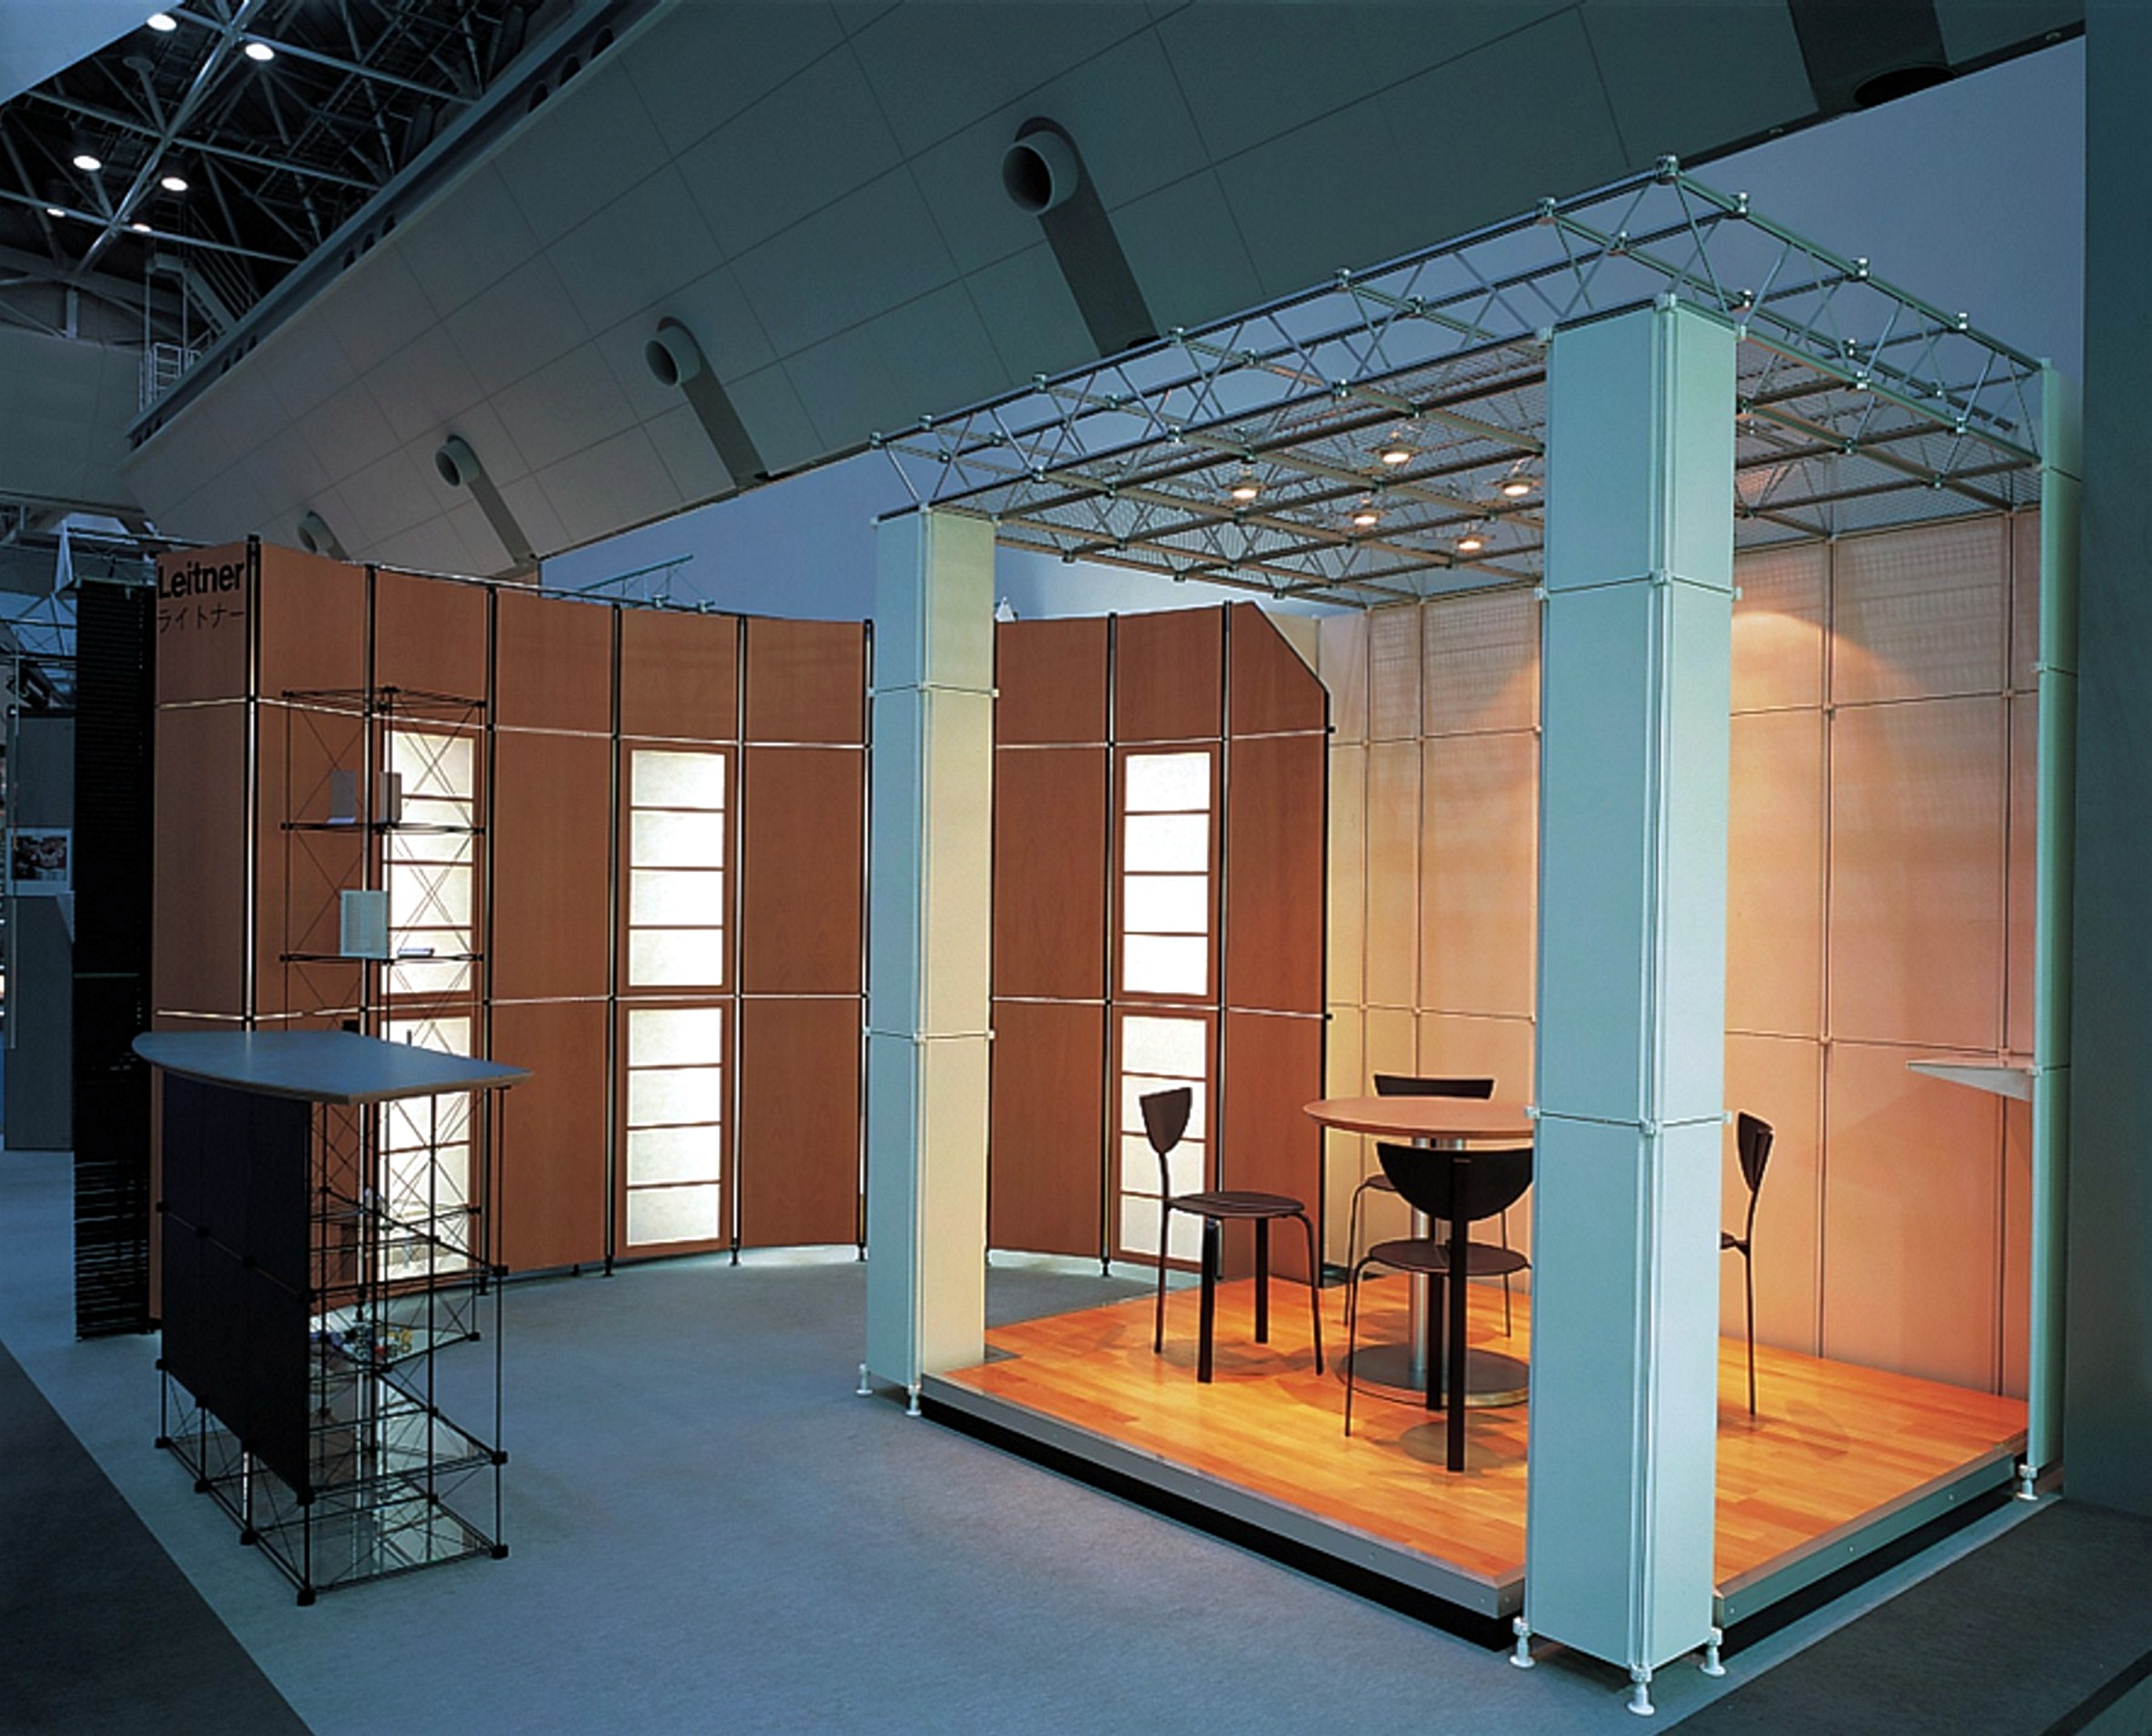 Leitner 1 modular display panel system used as a meeting area on a raised floor